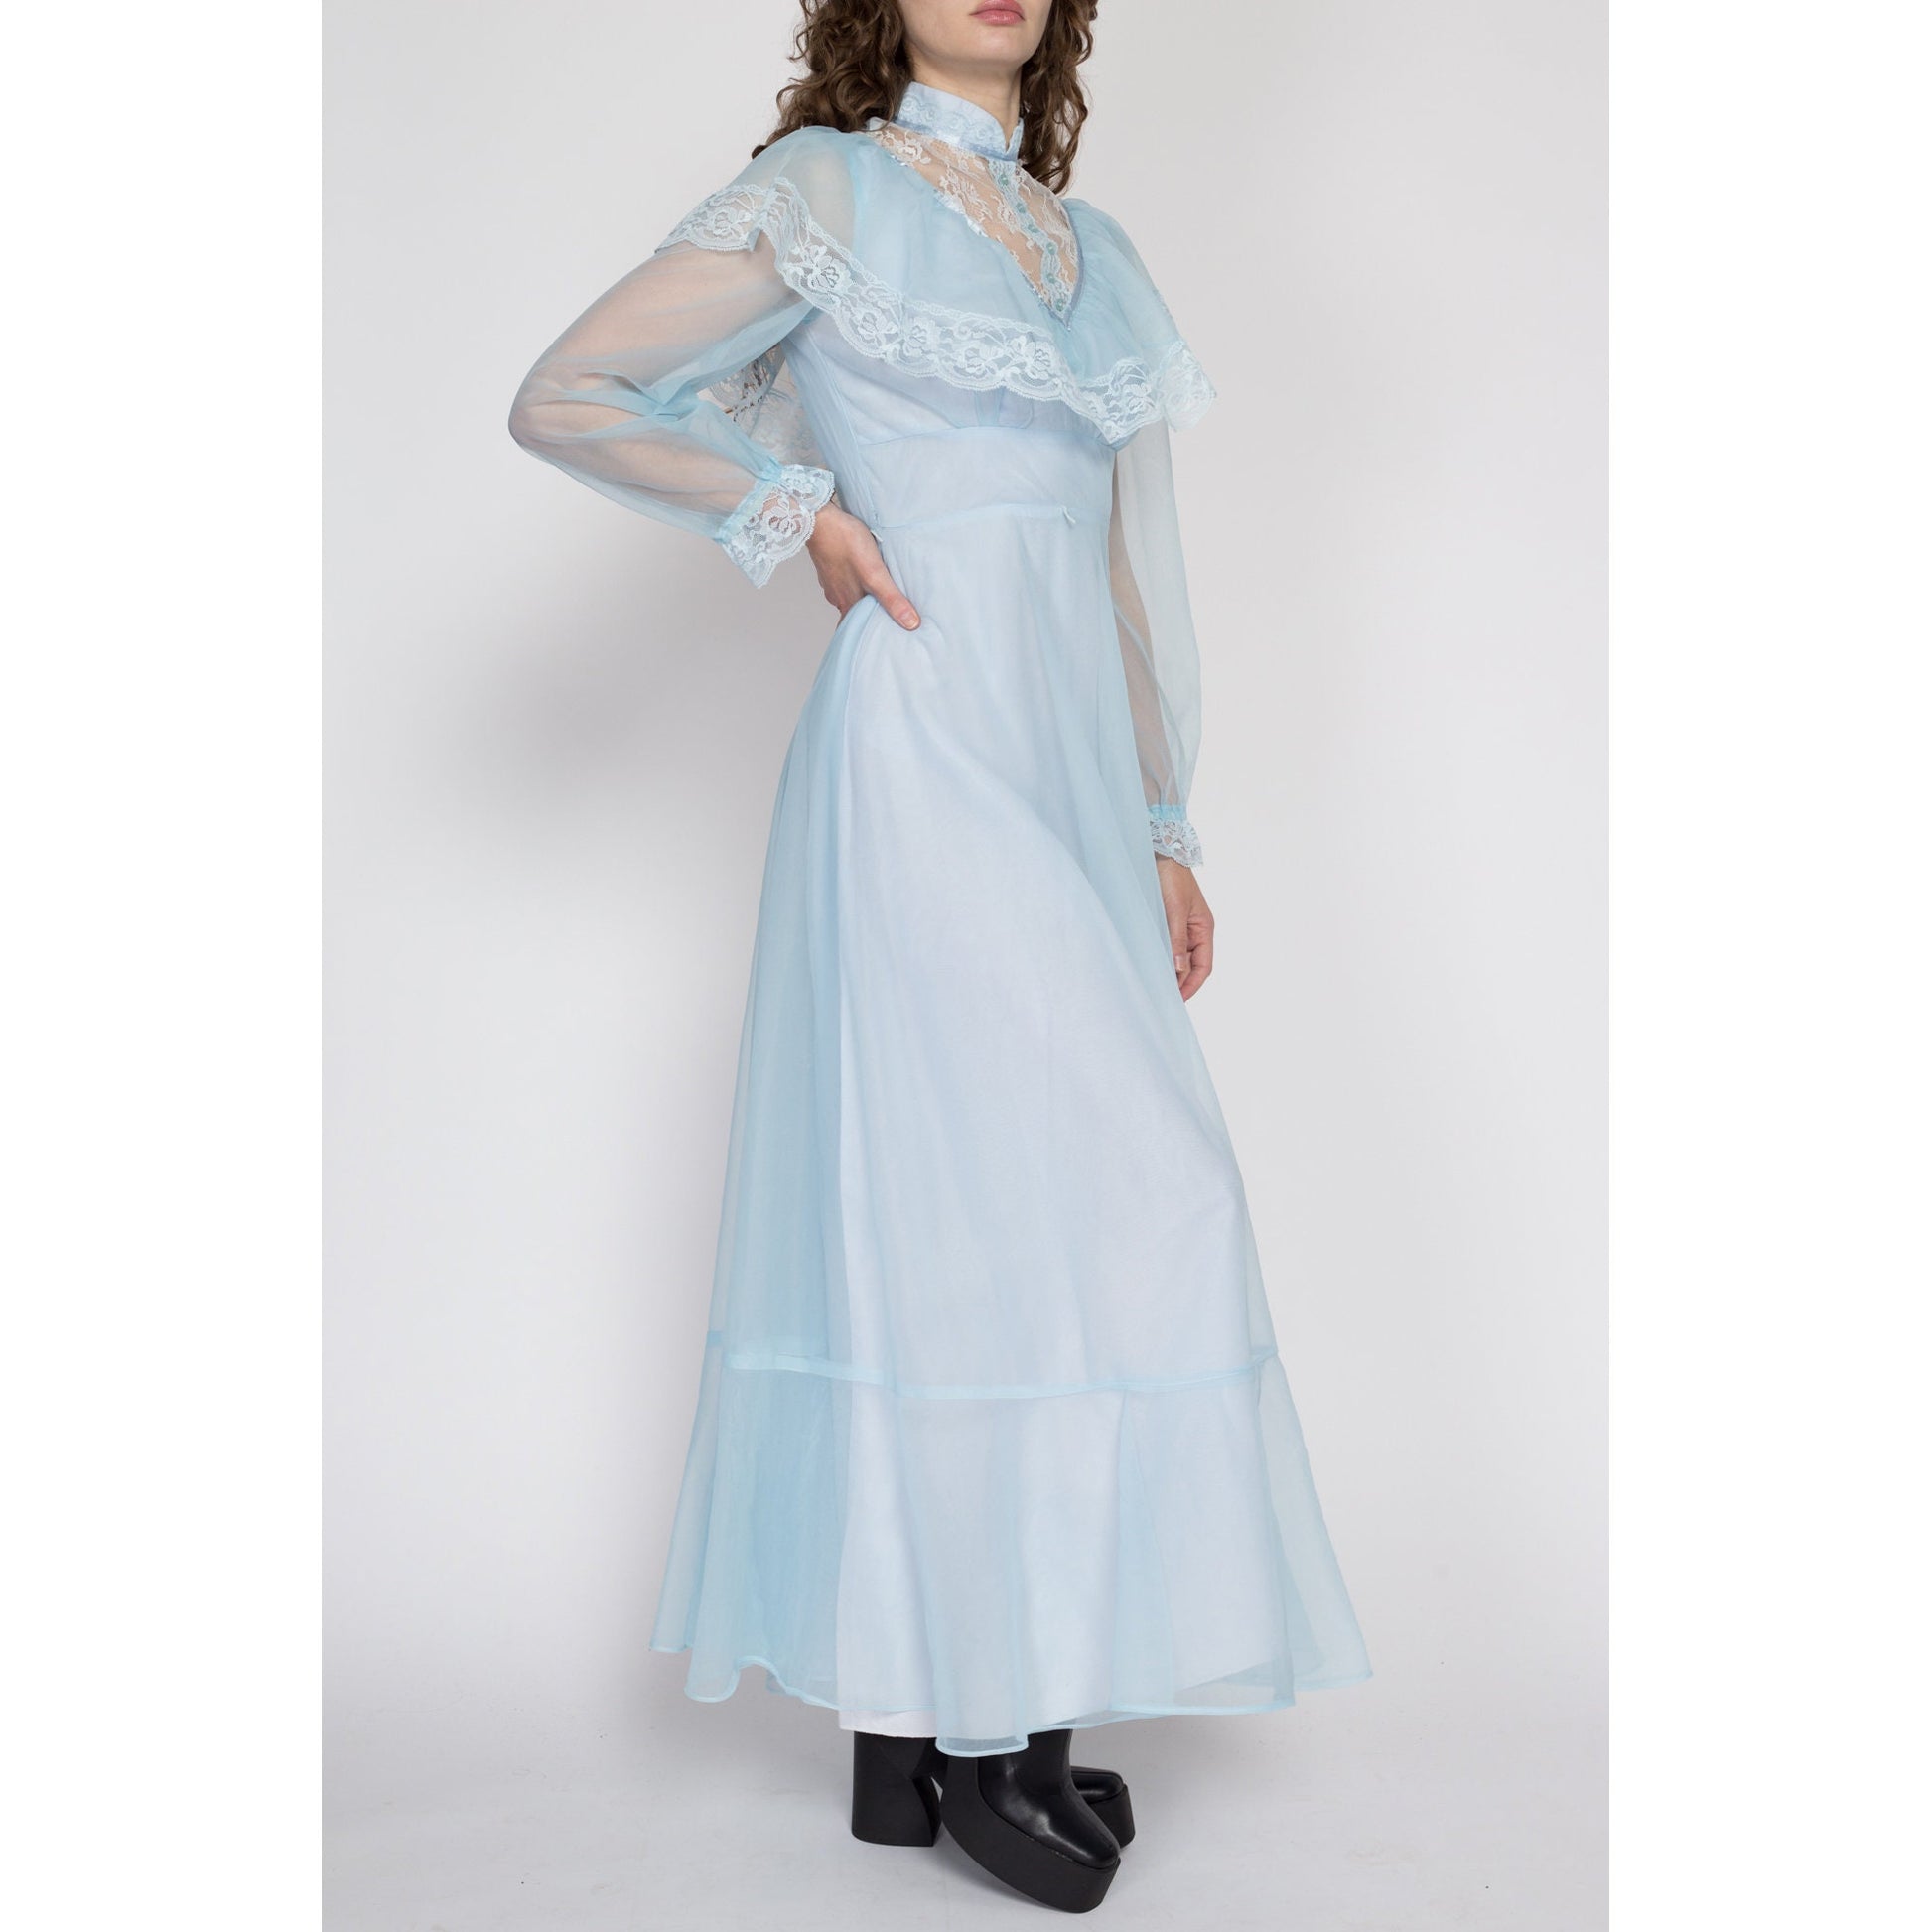 Small 70s Does Victorian Baby Blue Gown | Vintage Lace Trim Formal Boho Maxi Prairie Dress